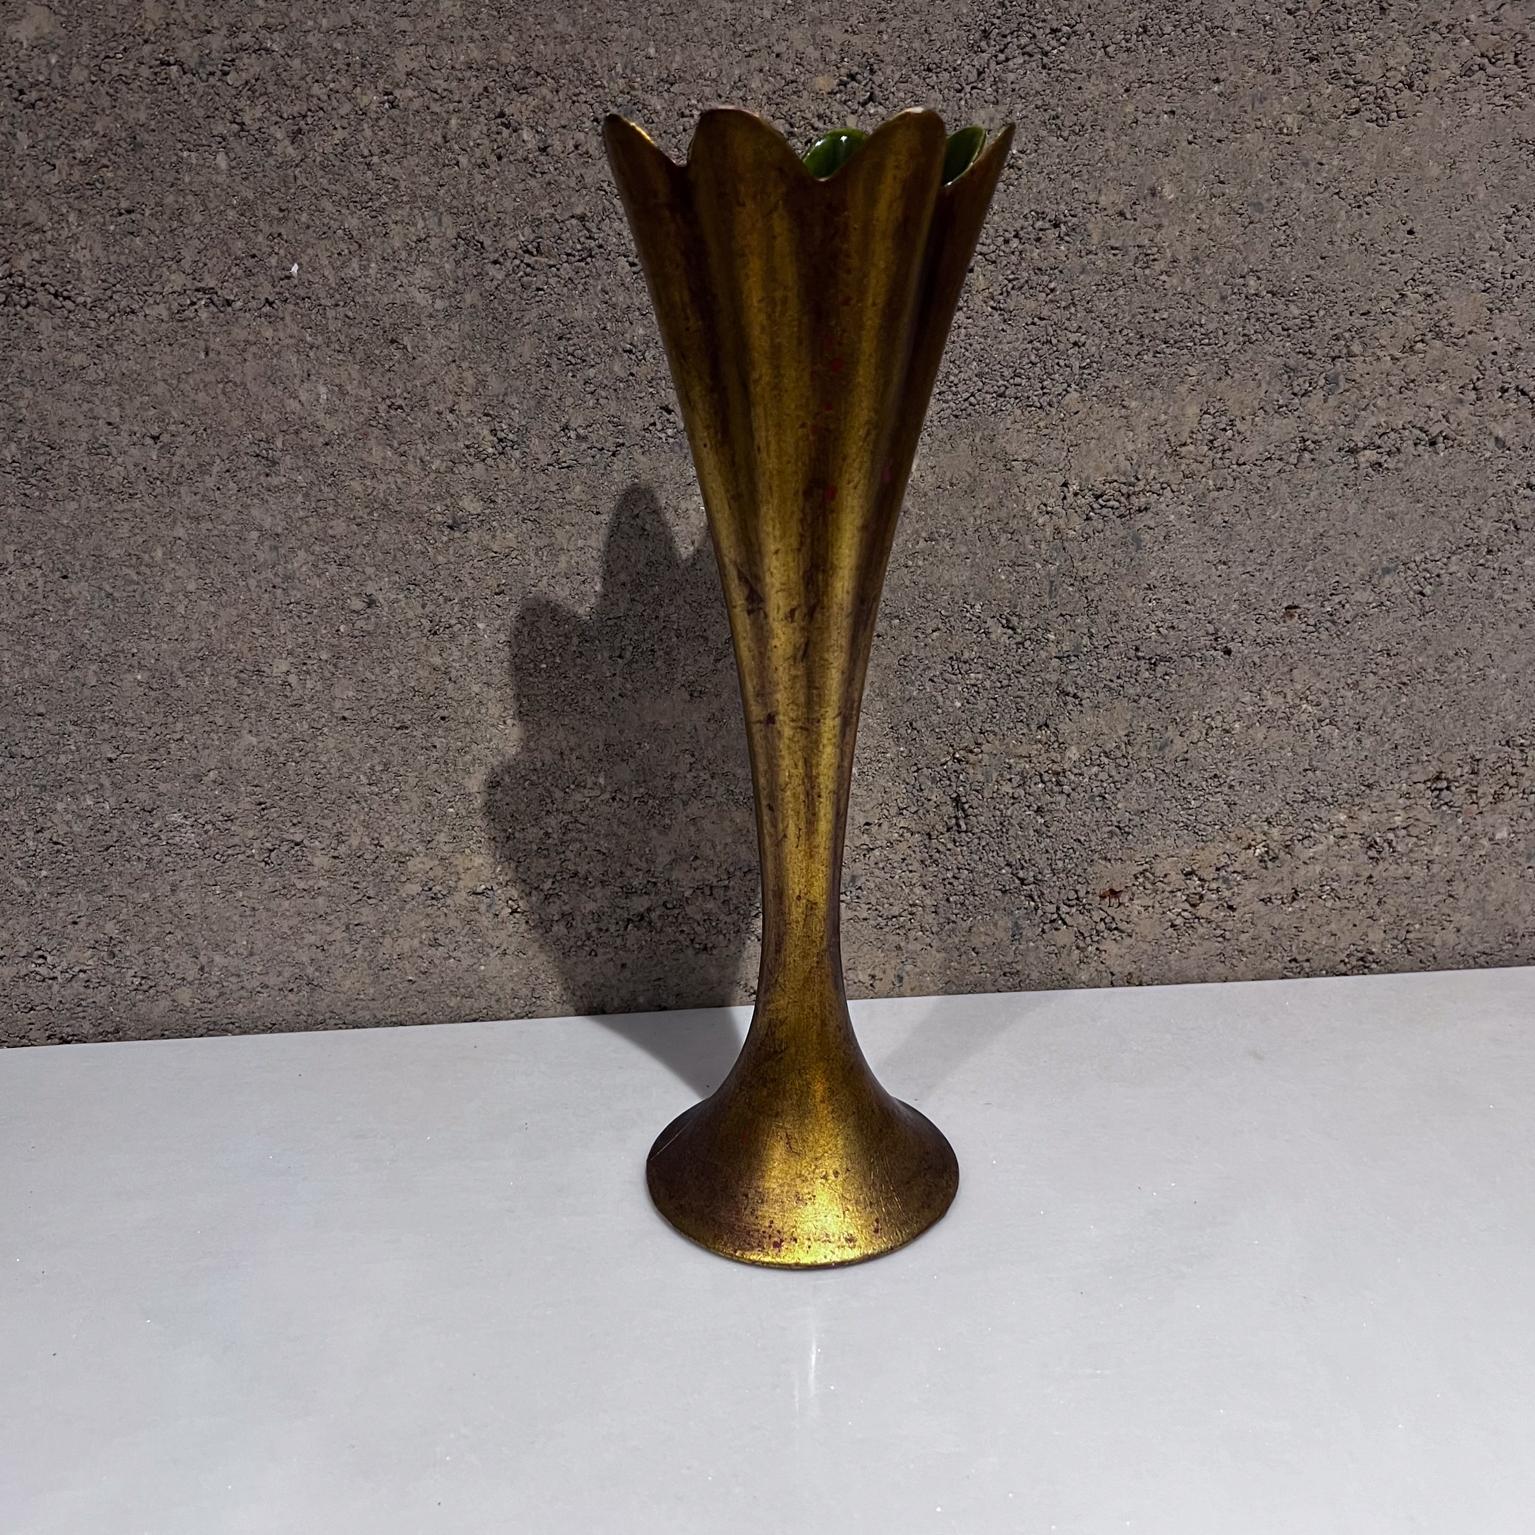 
1960s Anthony Gold Leaf Trumpet Bud Vase Pottery
Freeman McFarlin Pottery El Monte, California
11.25 h x 3.75 diameter 
Stamped Anthony USA #572
Vase interior is glazed green.
Preowned original vintage condition
Refer to images.